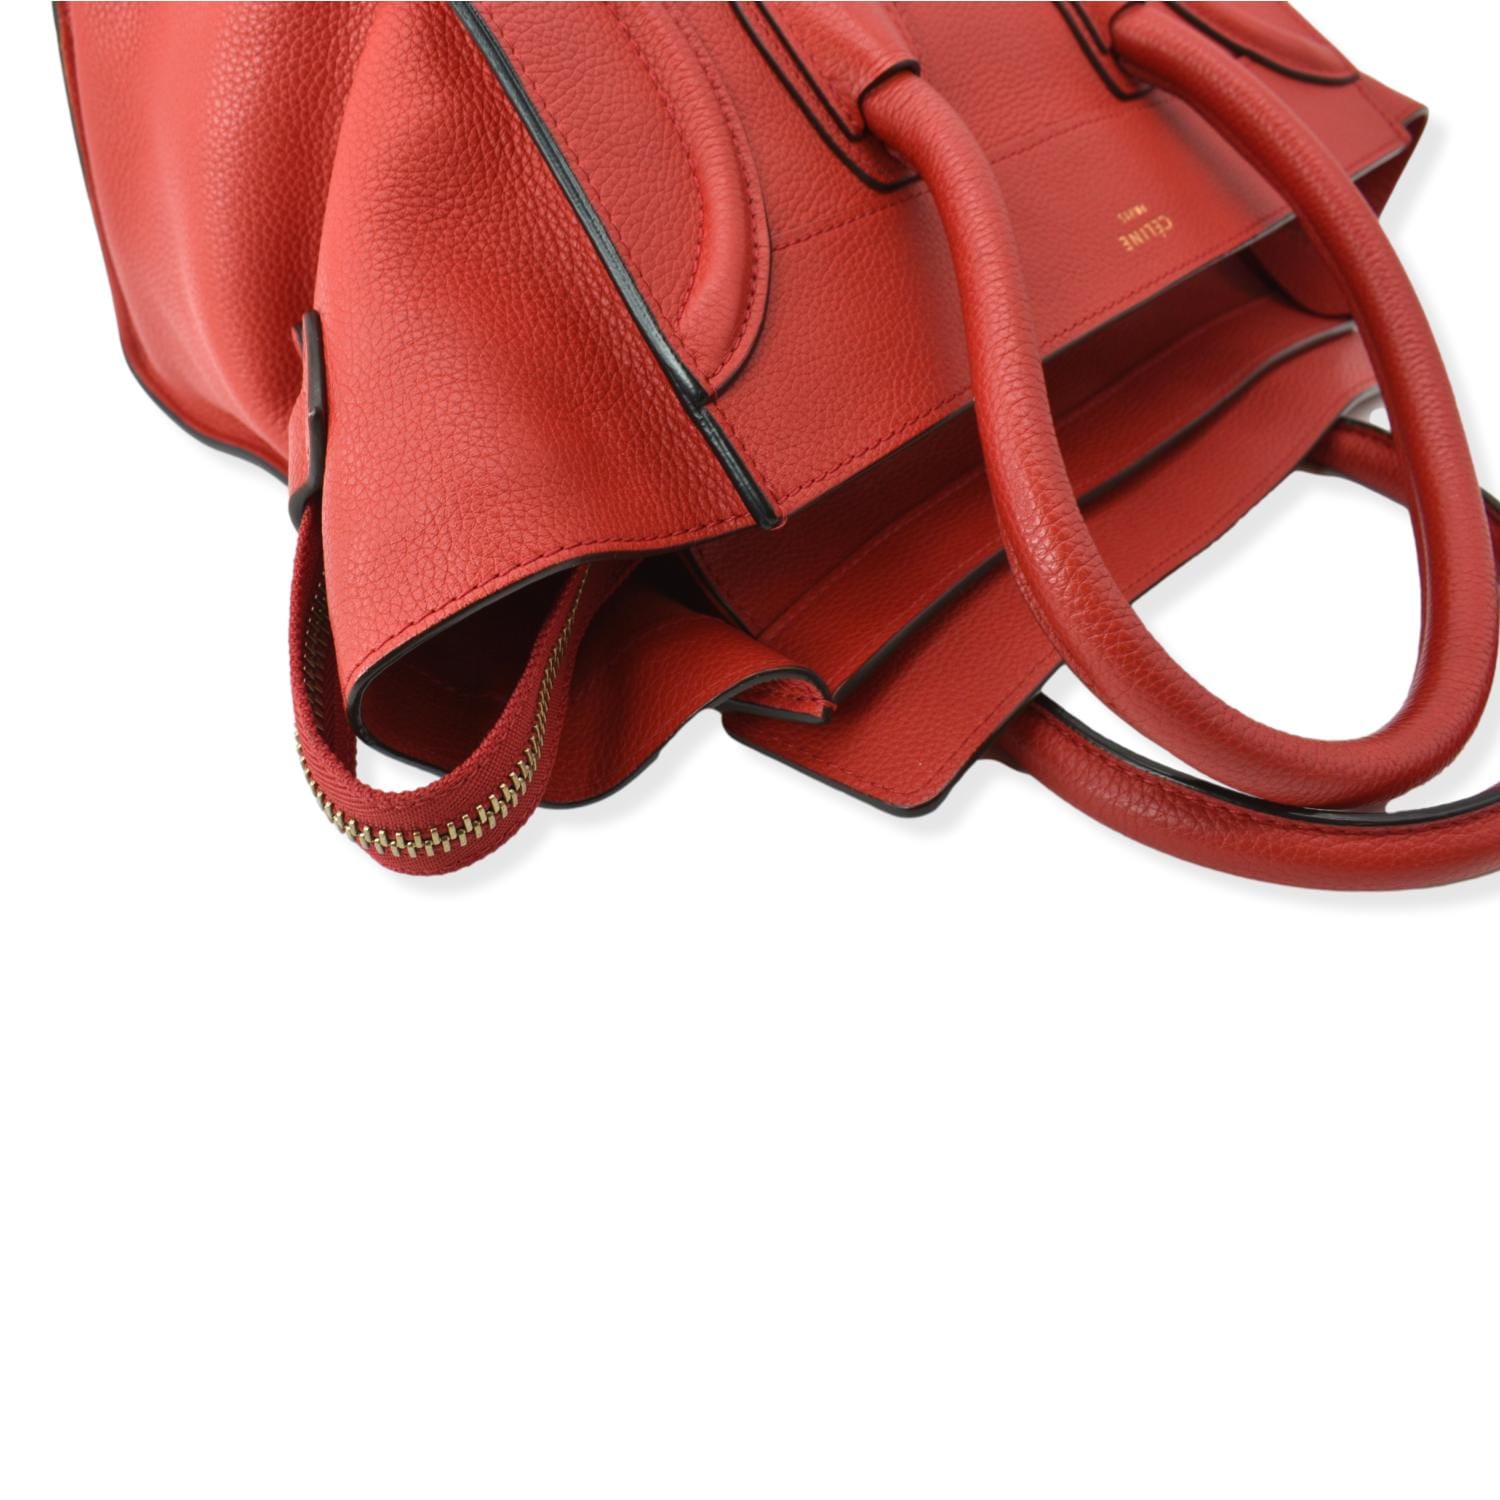 Santa Monica Tote Bag patent leather red ghw – L'UXE LINK